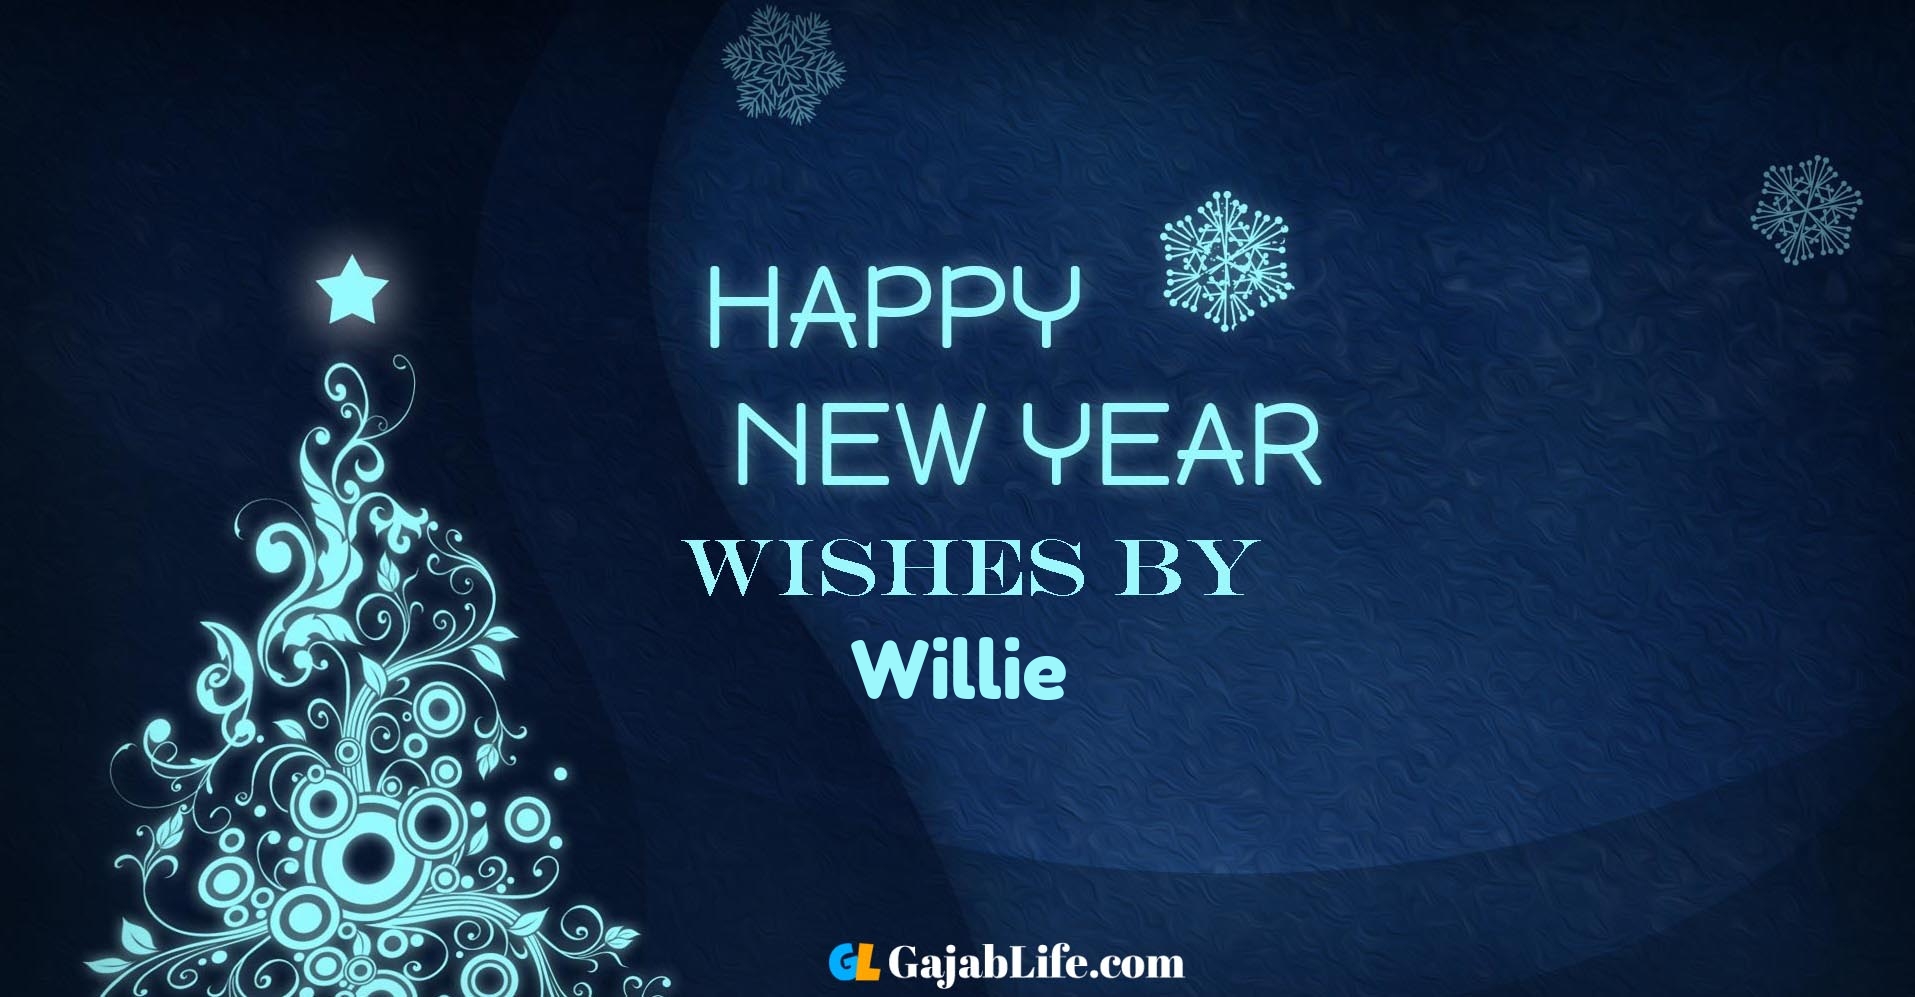 Happy new year wishes willie